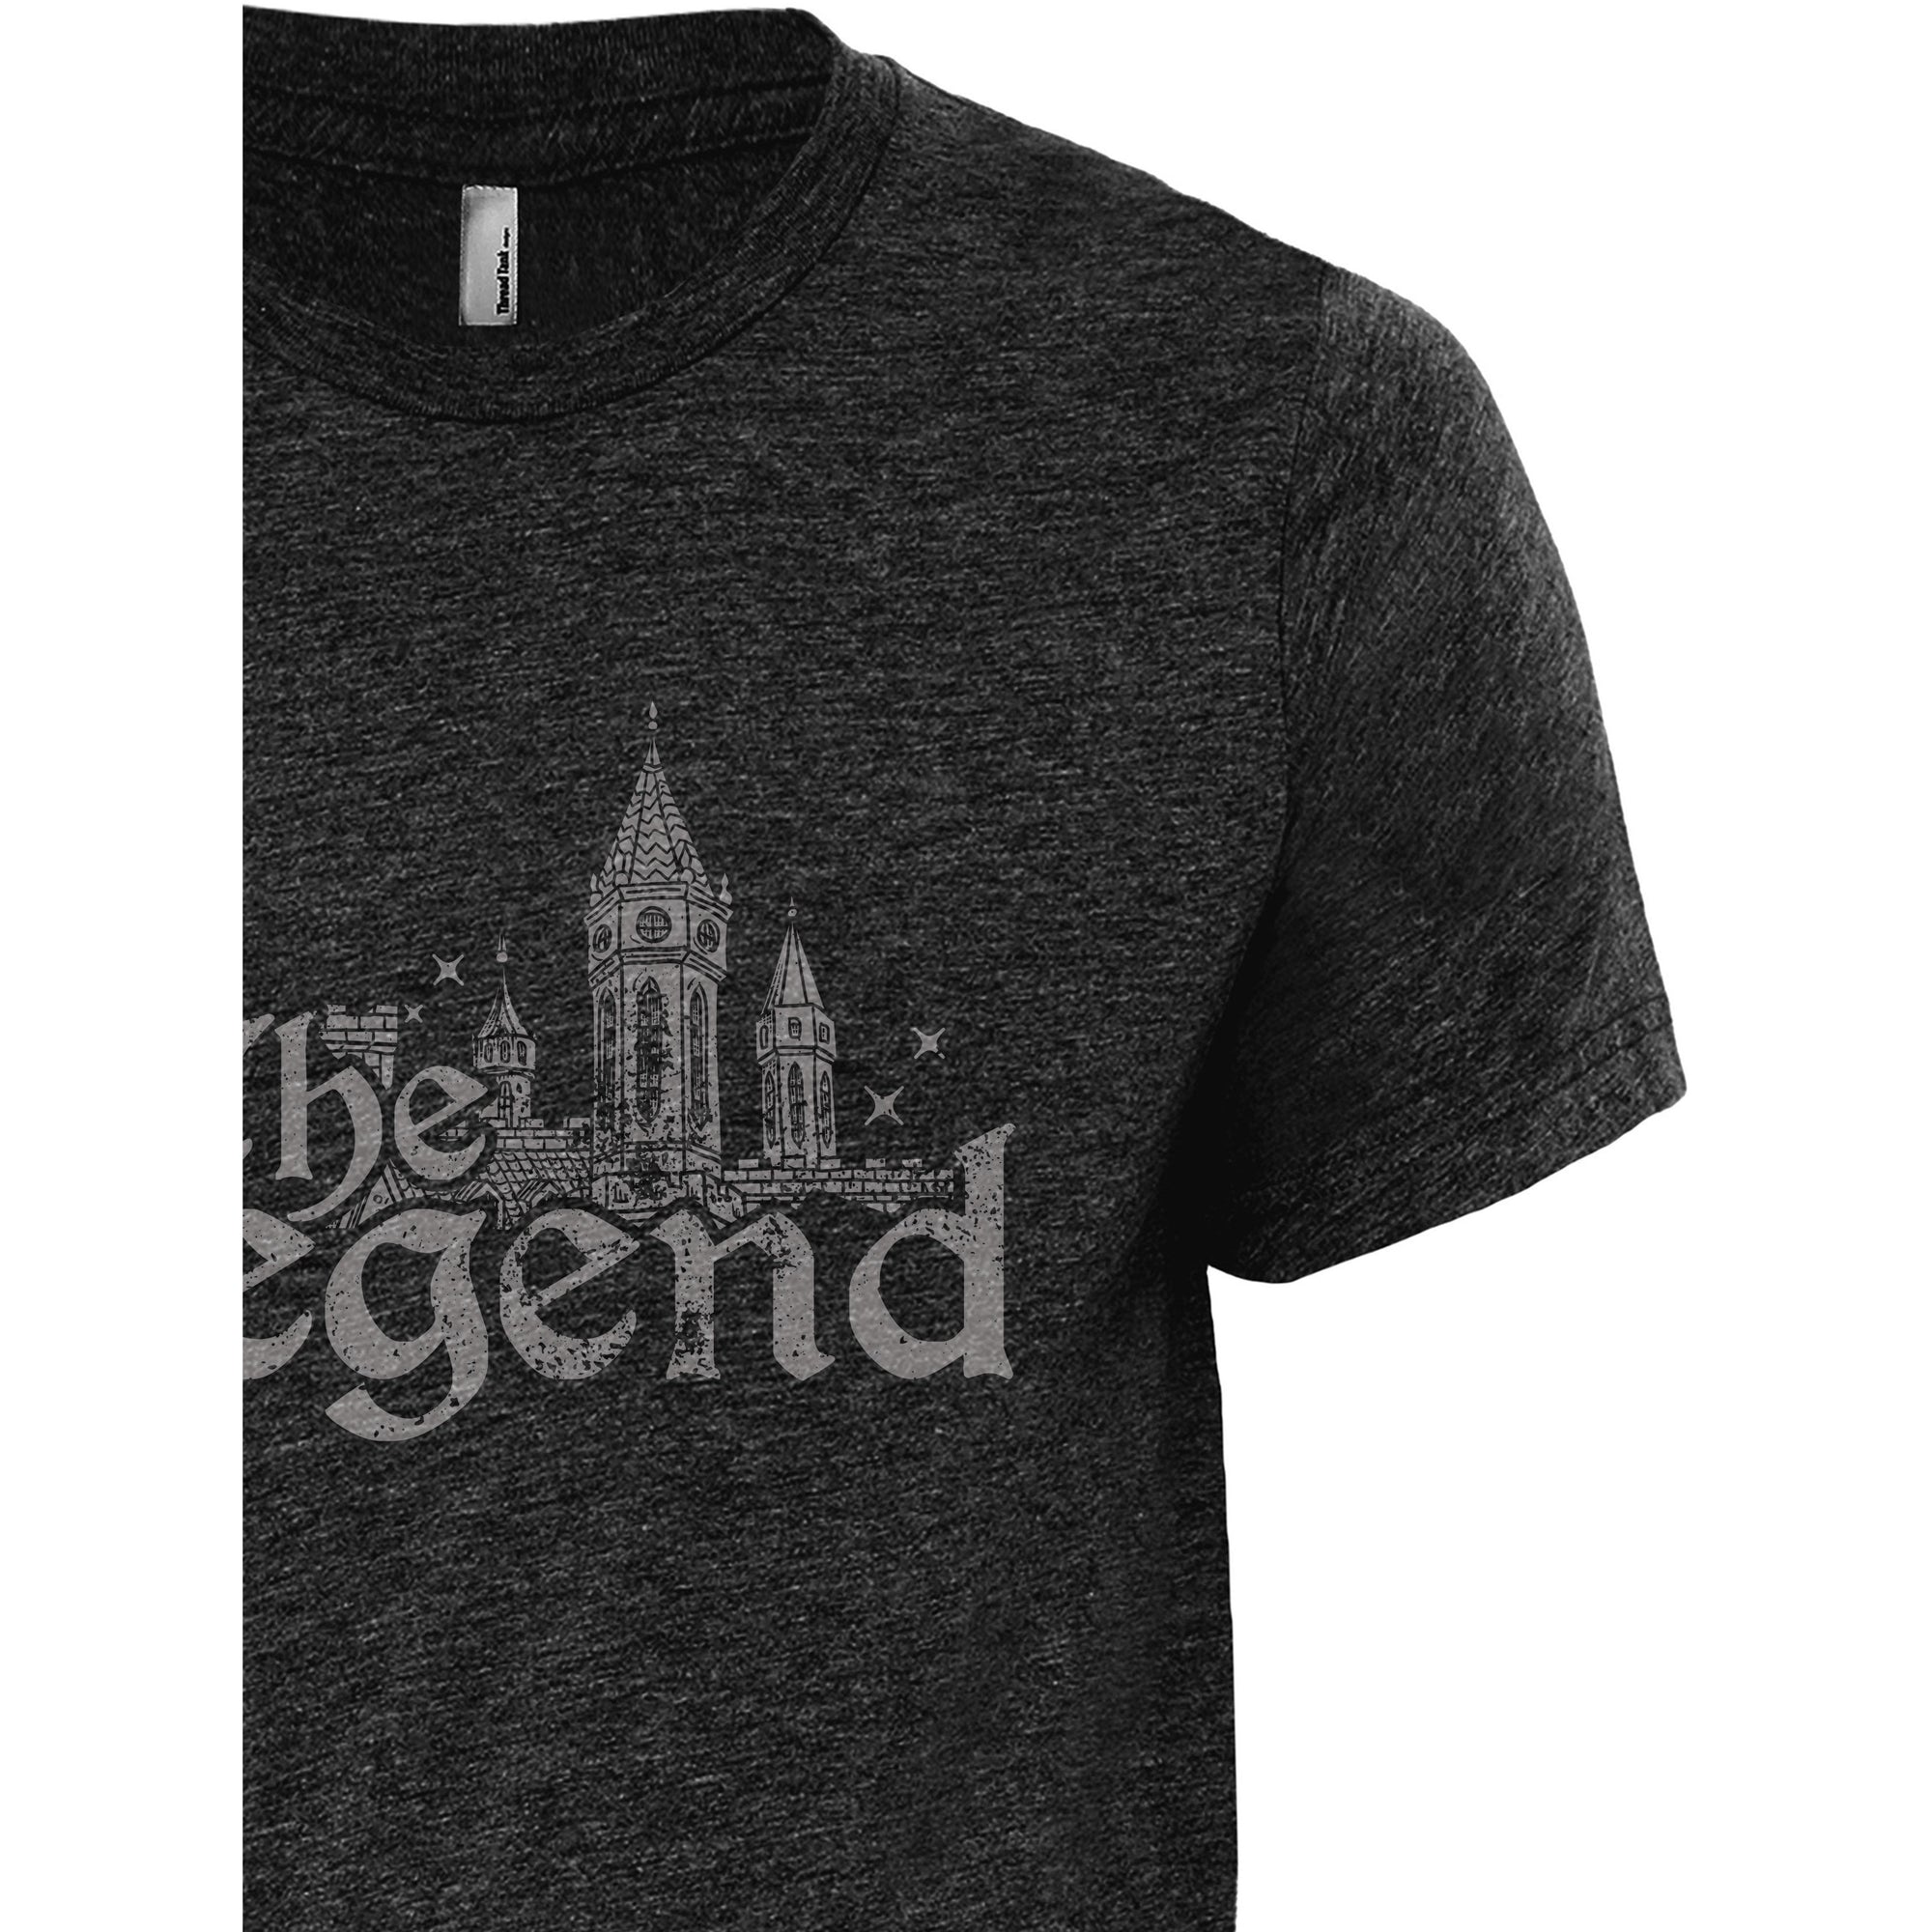 The Legend - thread tank | Stories you can wear.